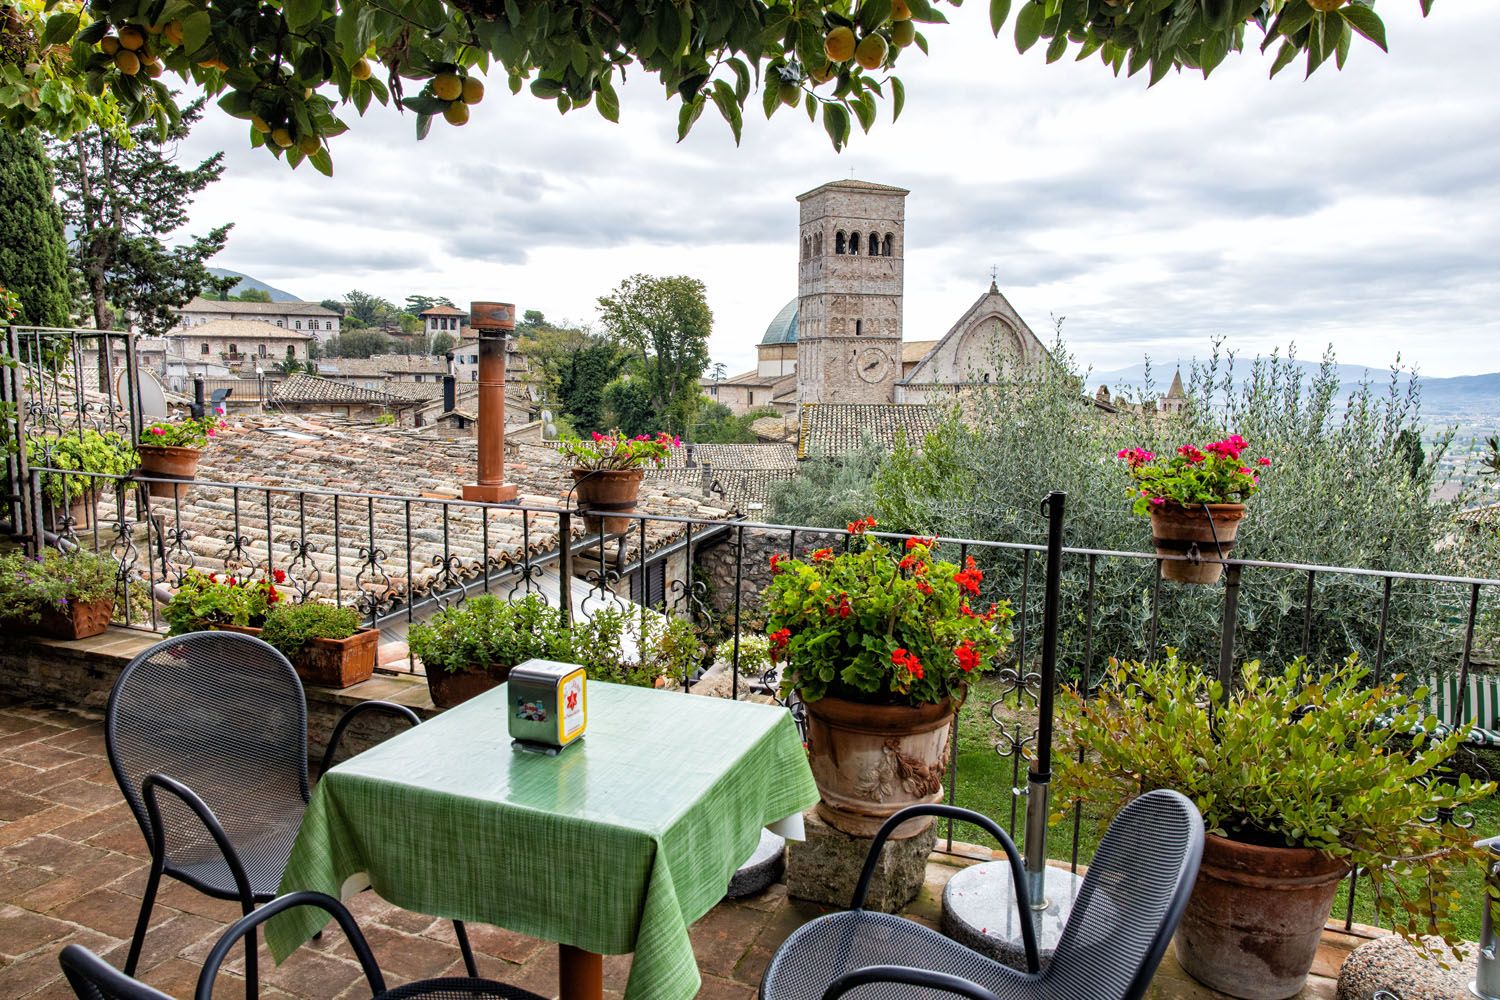 Where to Eat in Assisi